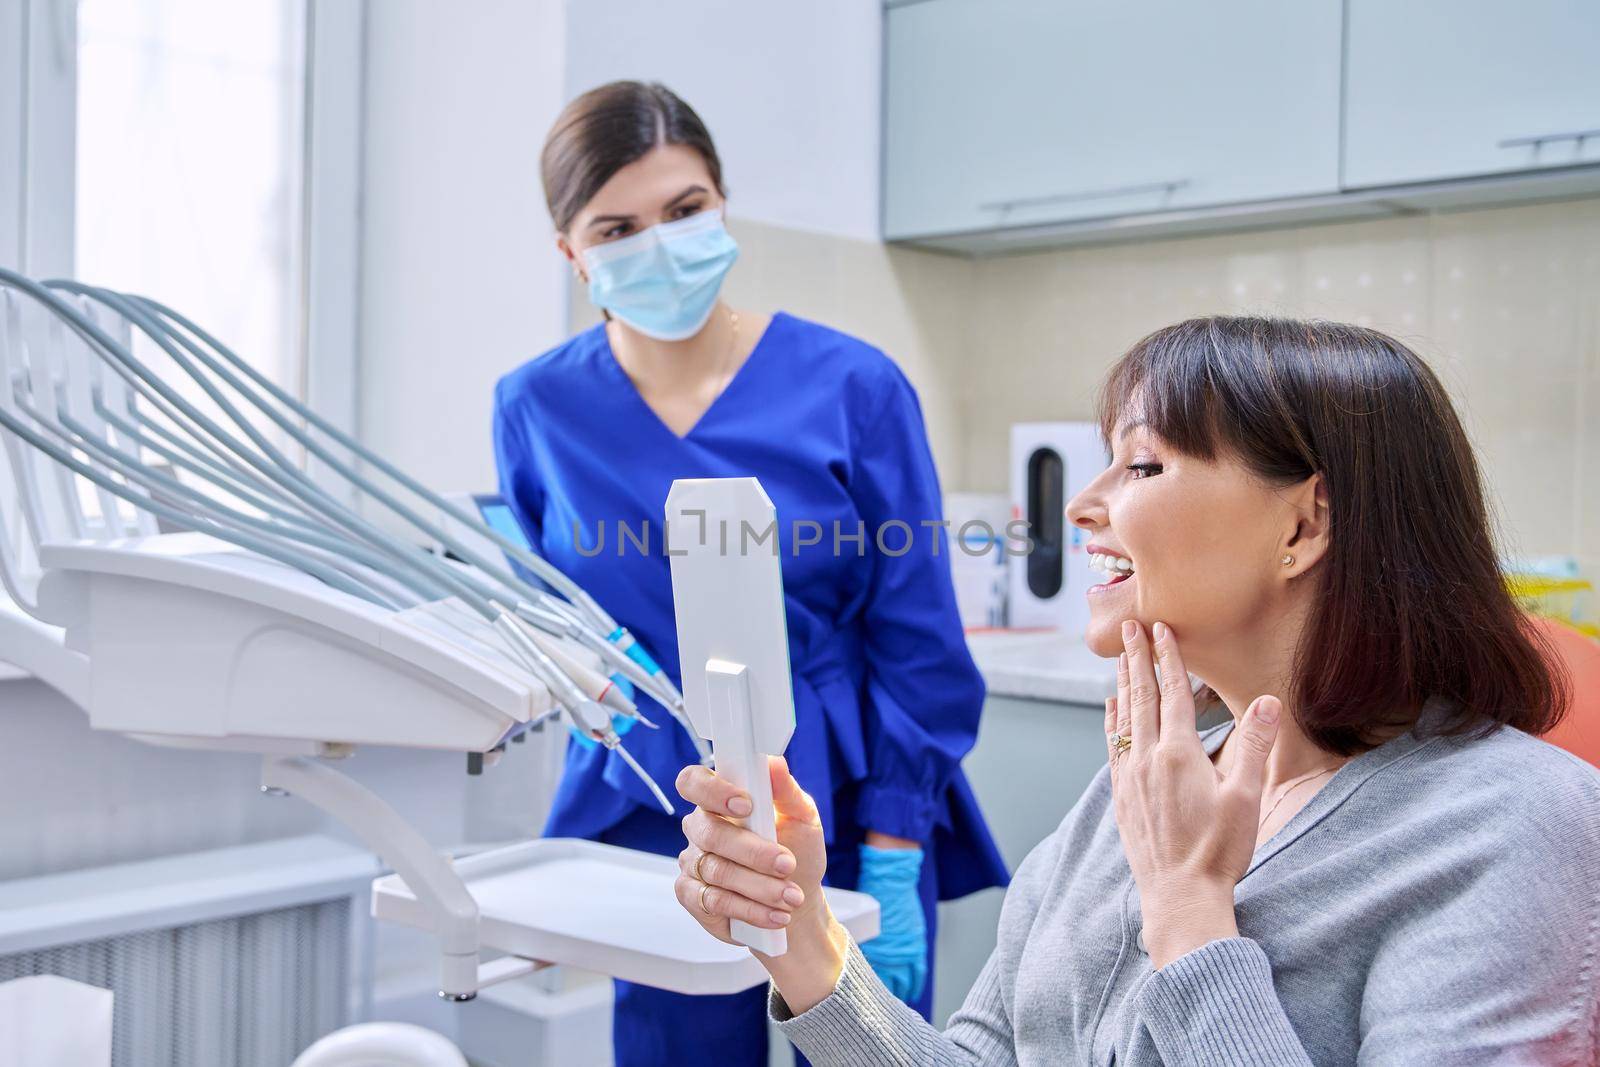 Dentist's office, woman patient looking at her teeth in the mirror. Doctor dentist near the dental chair with tools. Treatment, dental care, prosthetics, orthodontics, dentistry concept